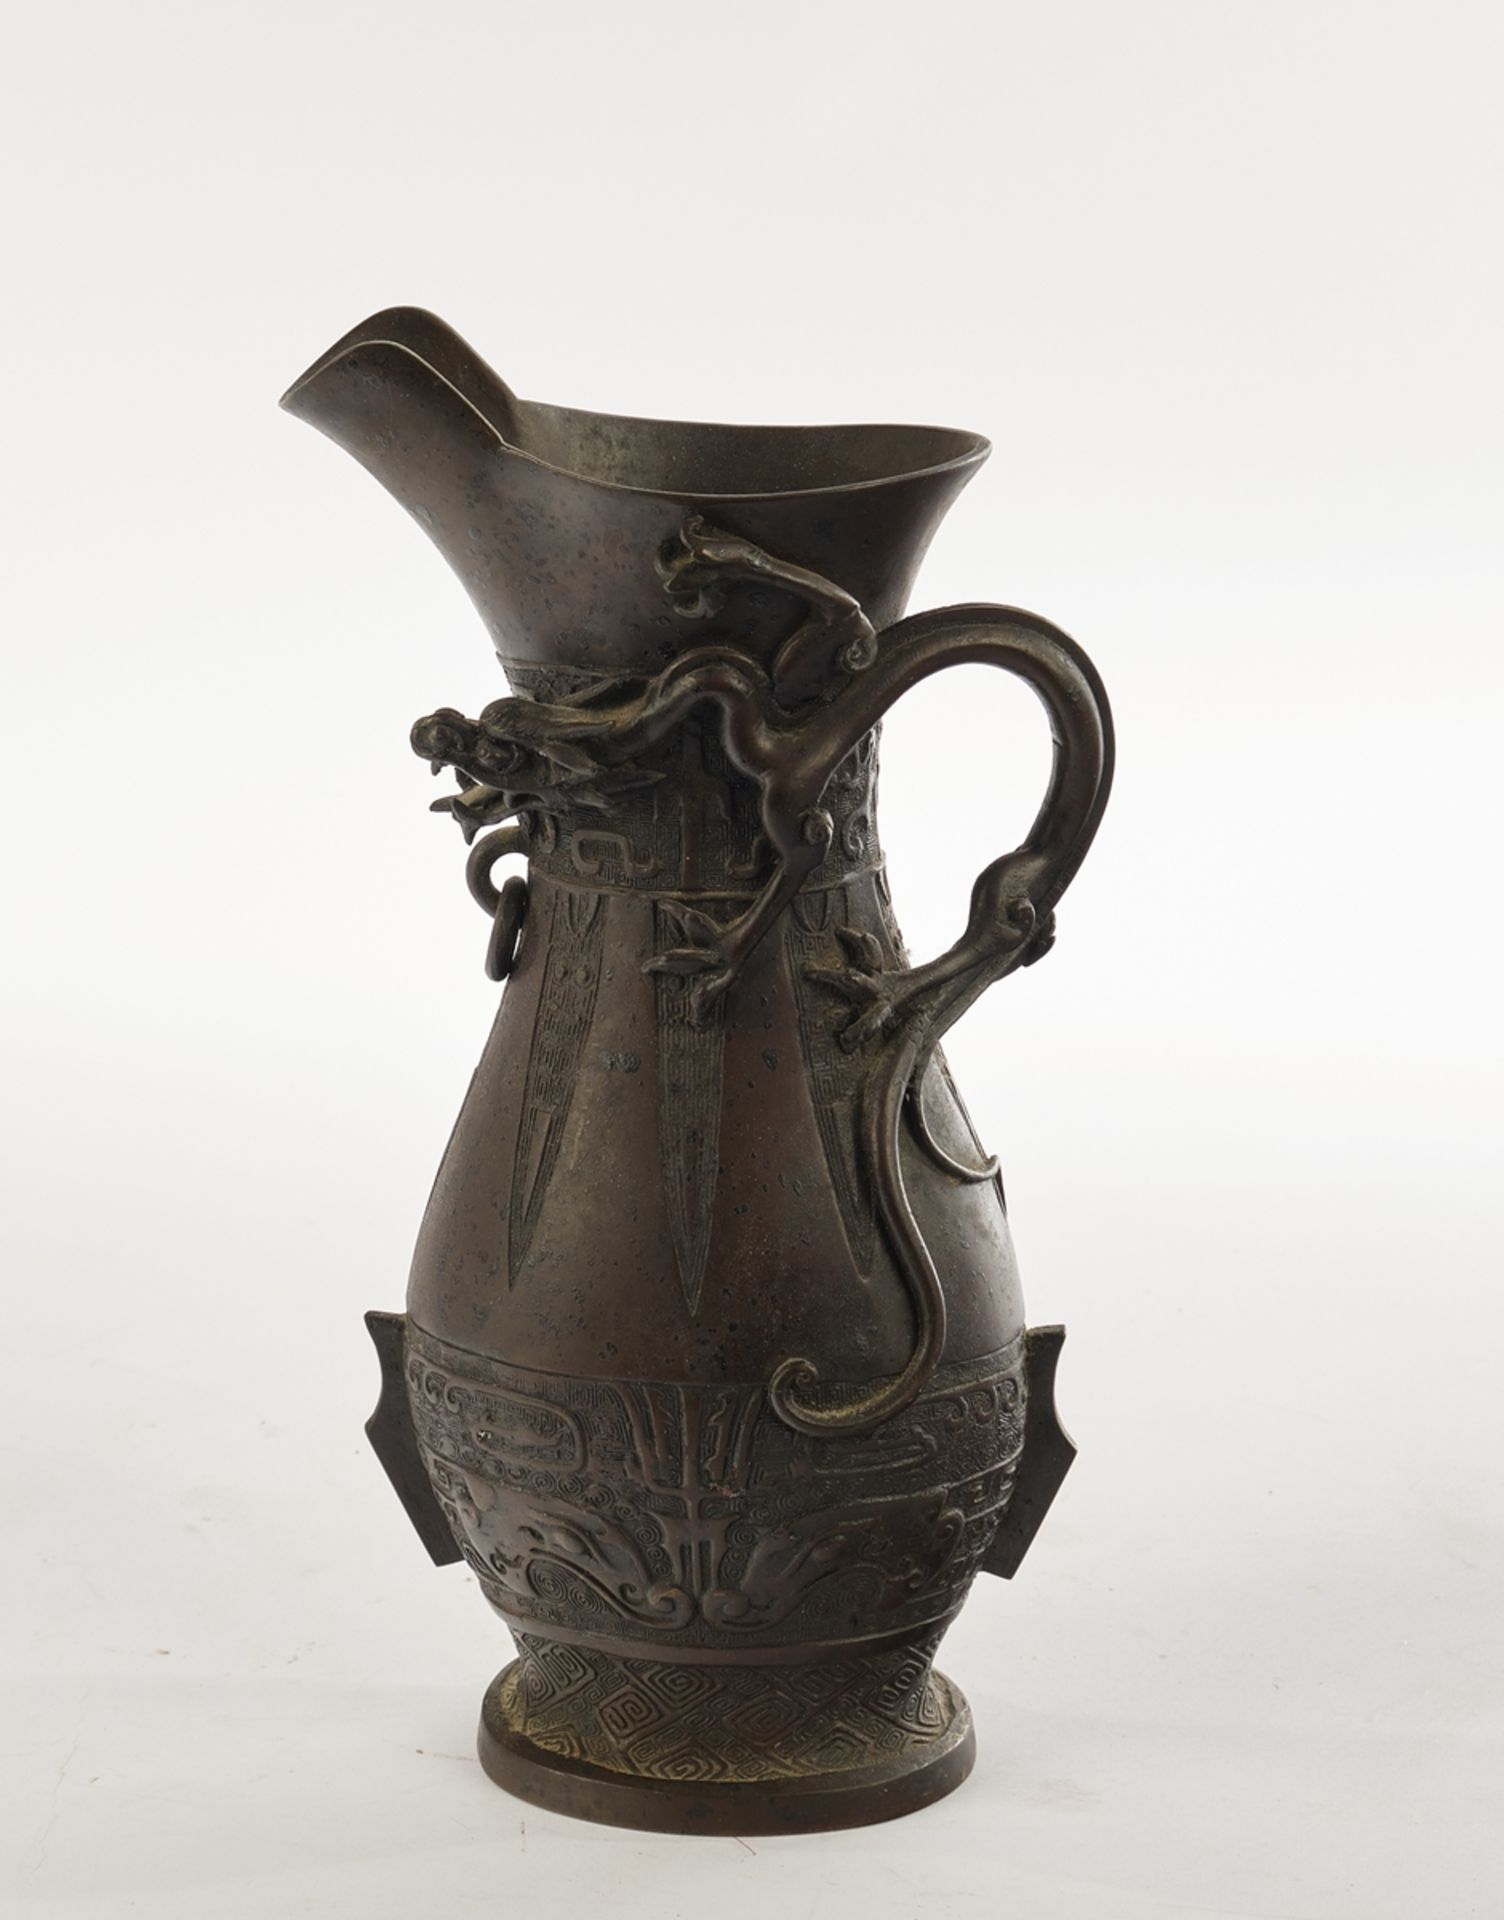 Jug, Japan, c. 1900, bronze, dark patina, archaic decoration in Chinese style, handle in the shape 